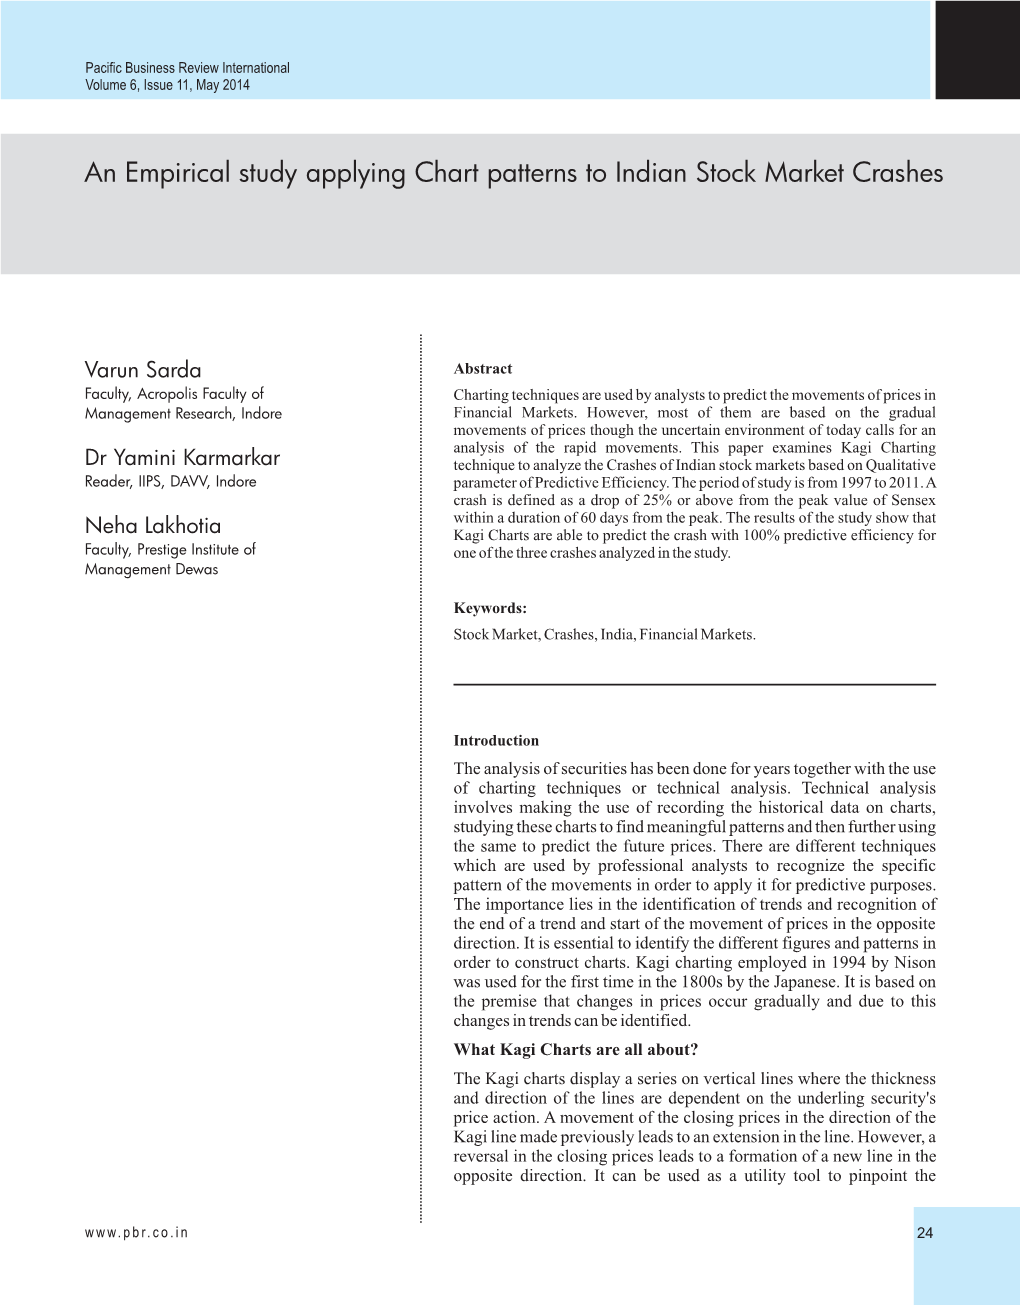 An Empirical Study Applying Chart Patterns to Indian Stock Market Crashes